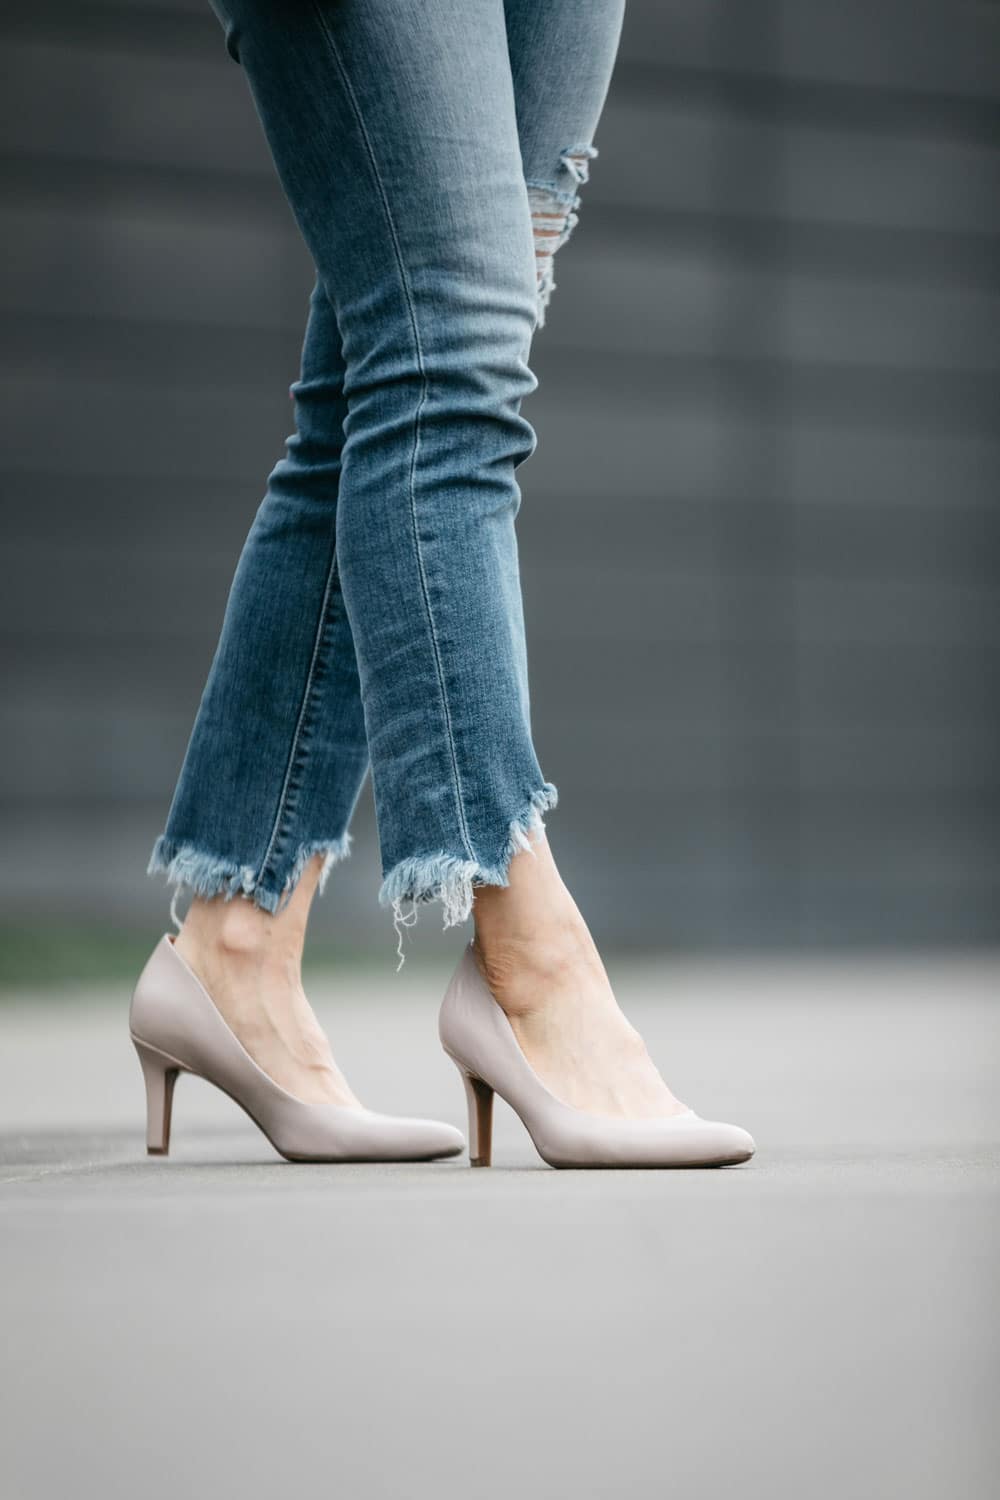 levi's cropped jeans and naturalizer evie heels